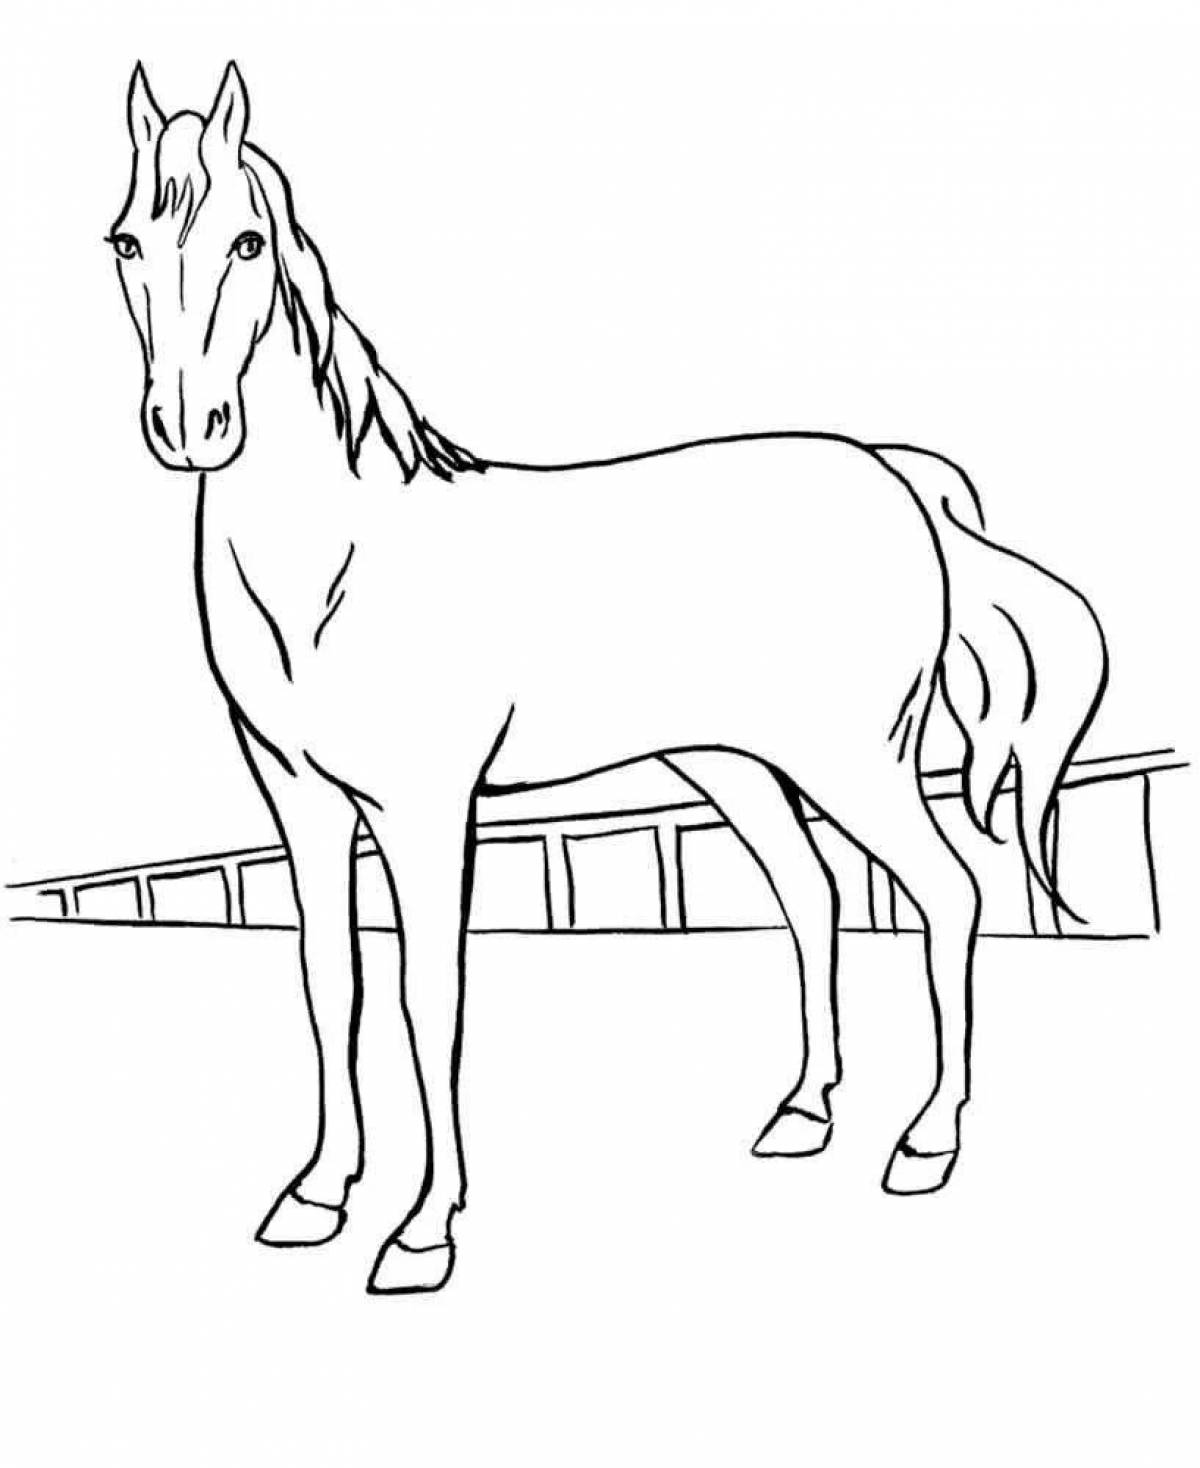 Playful drawing of a horse for children